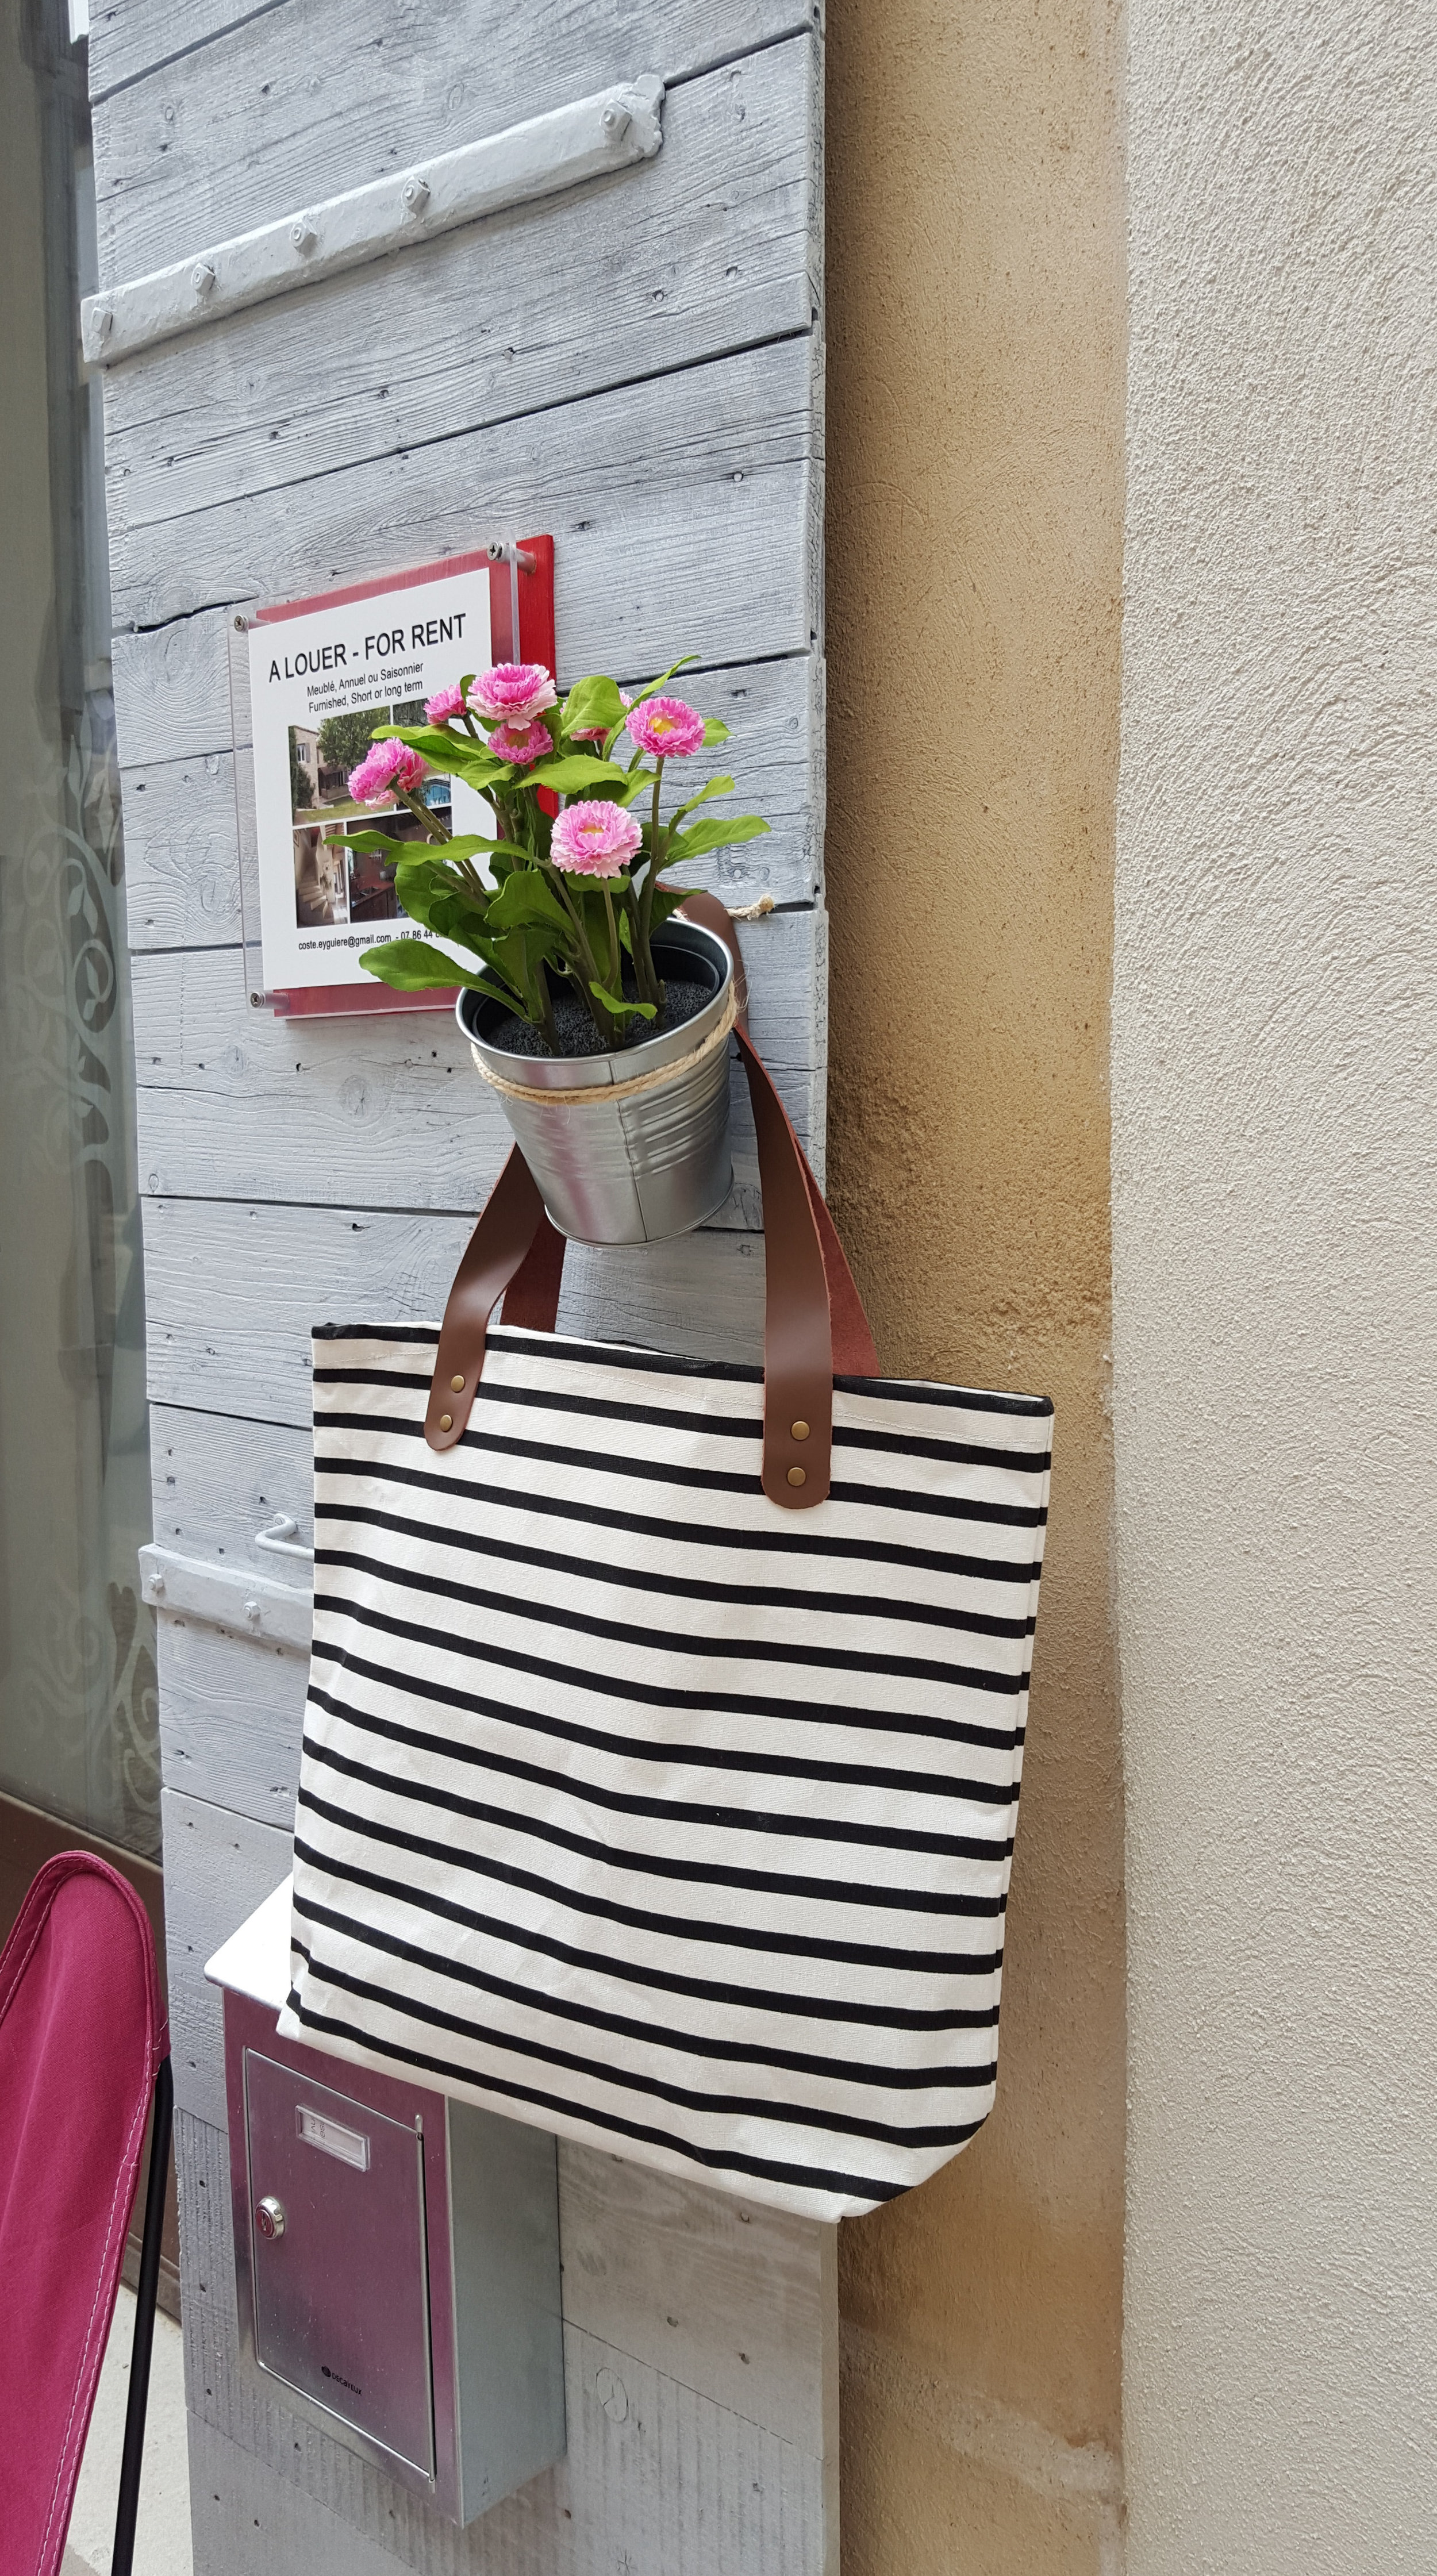 inviting storefront in provence _bag.jpg